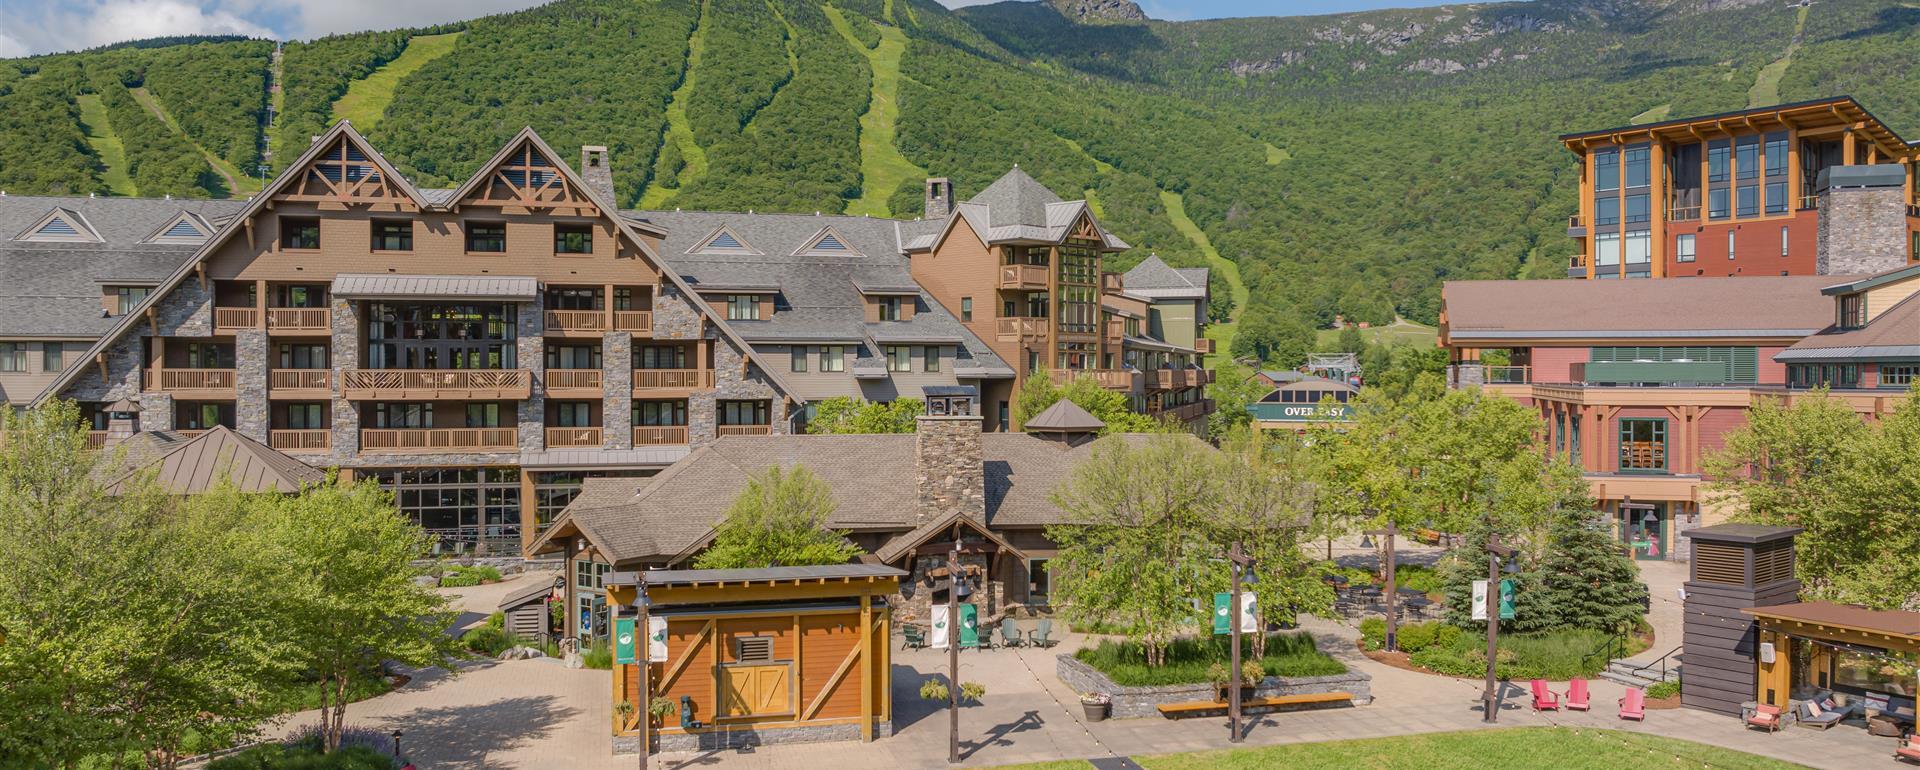 The Village At Spruce Peak  Spruce Peak Shops and Activities